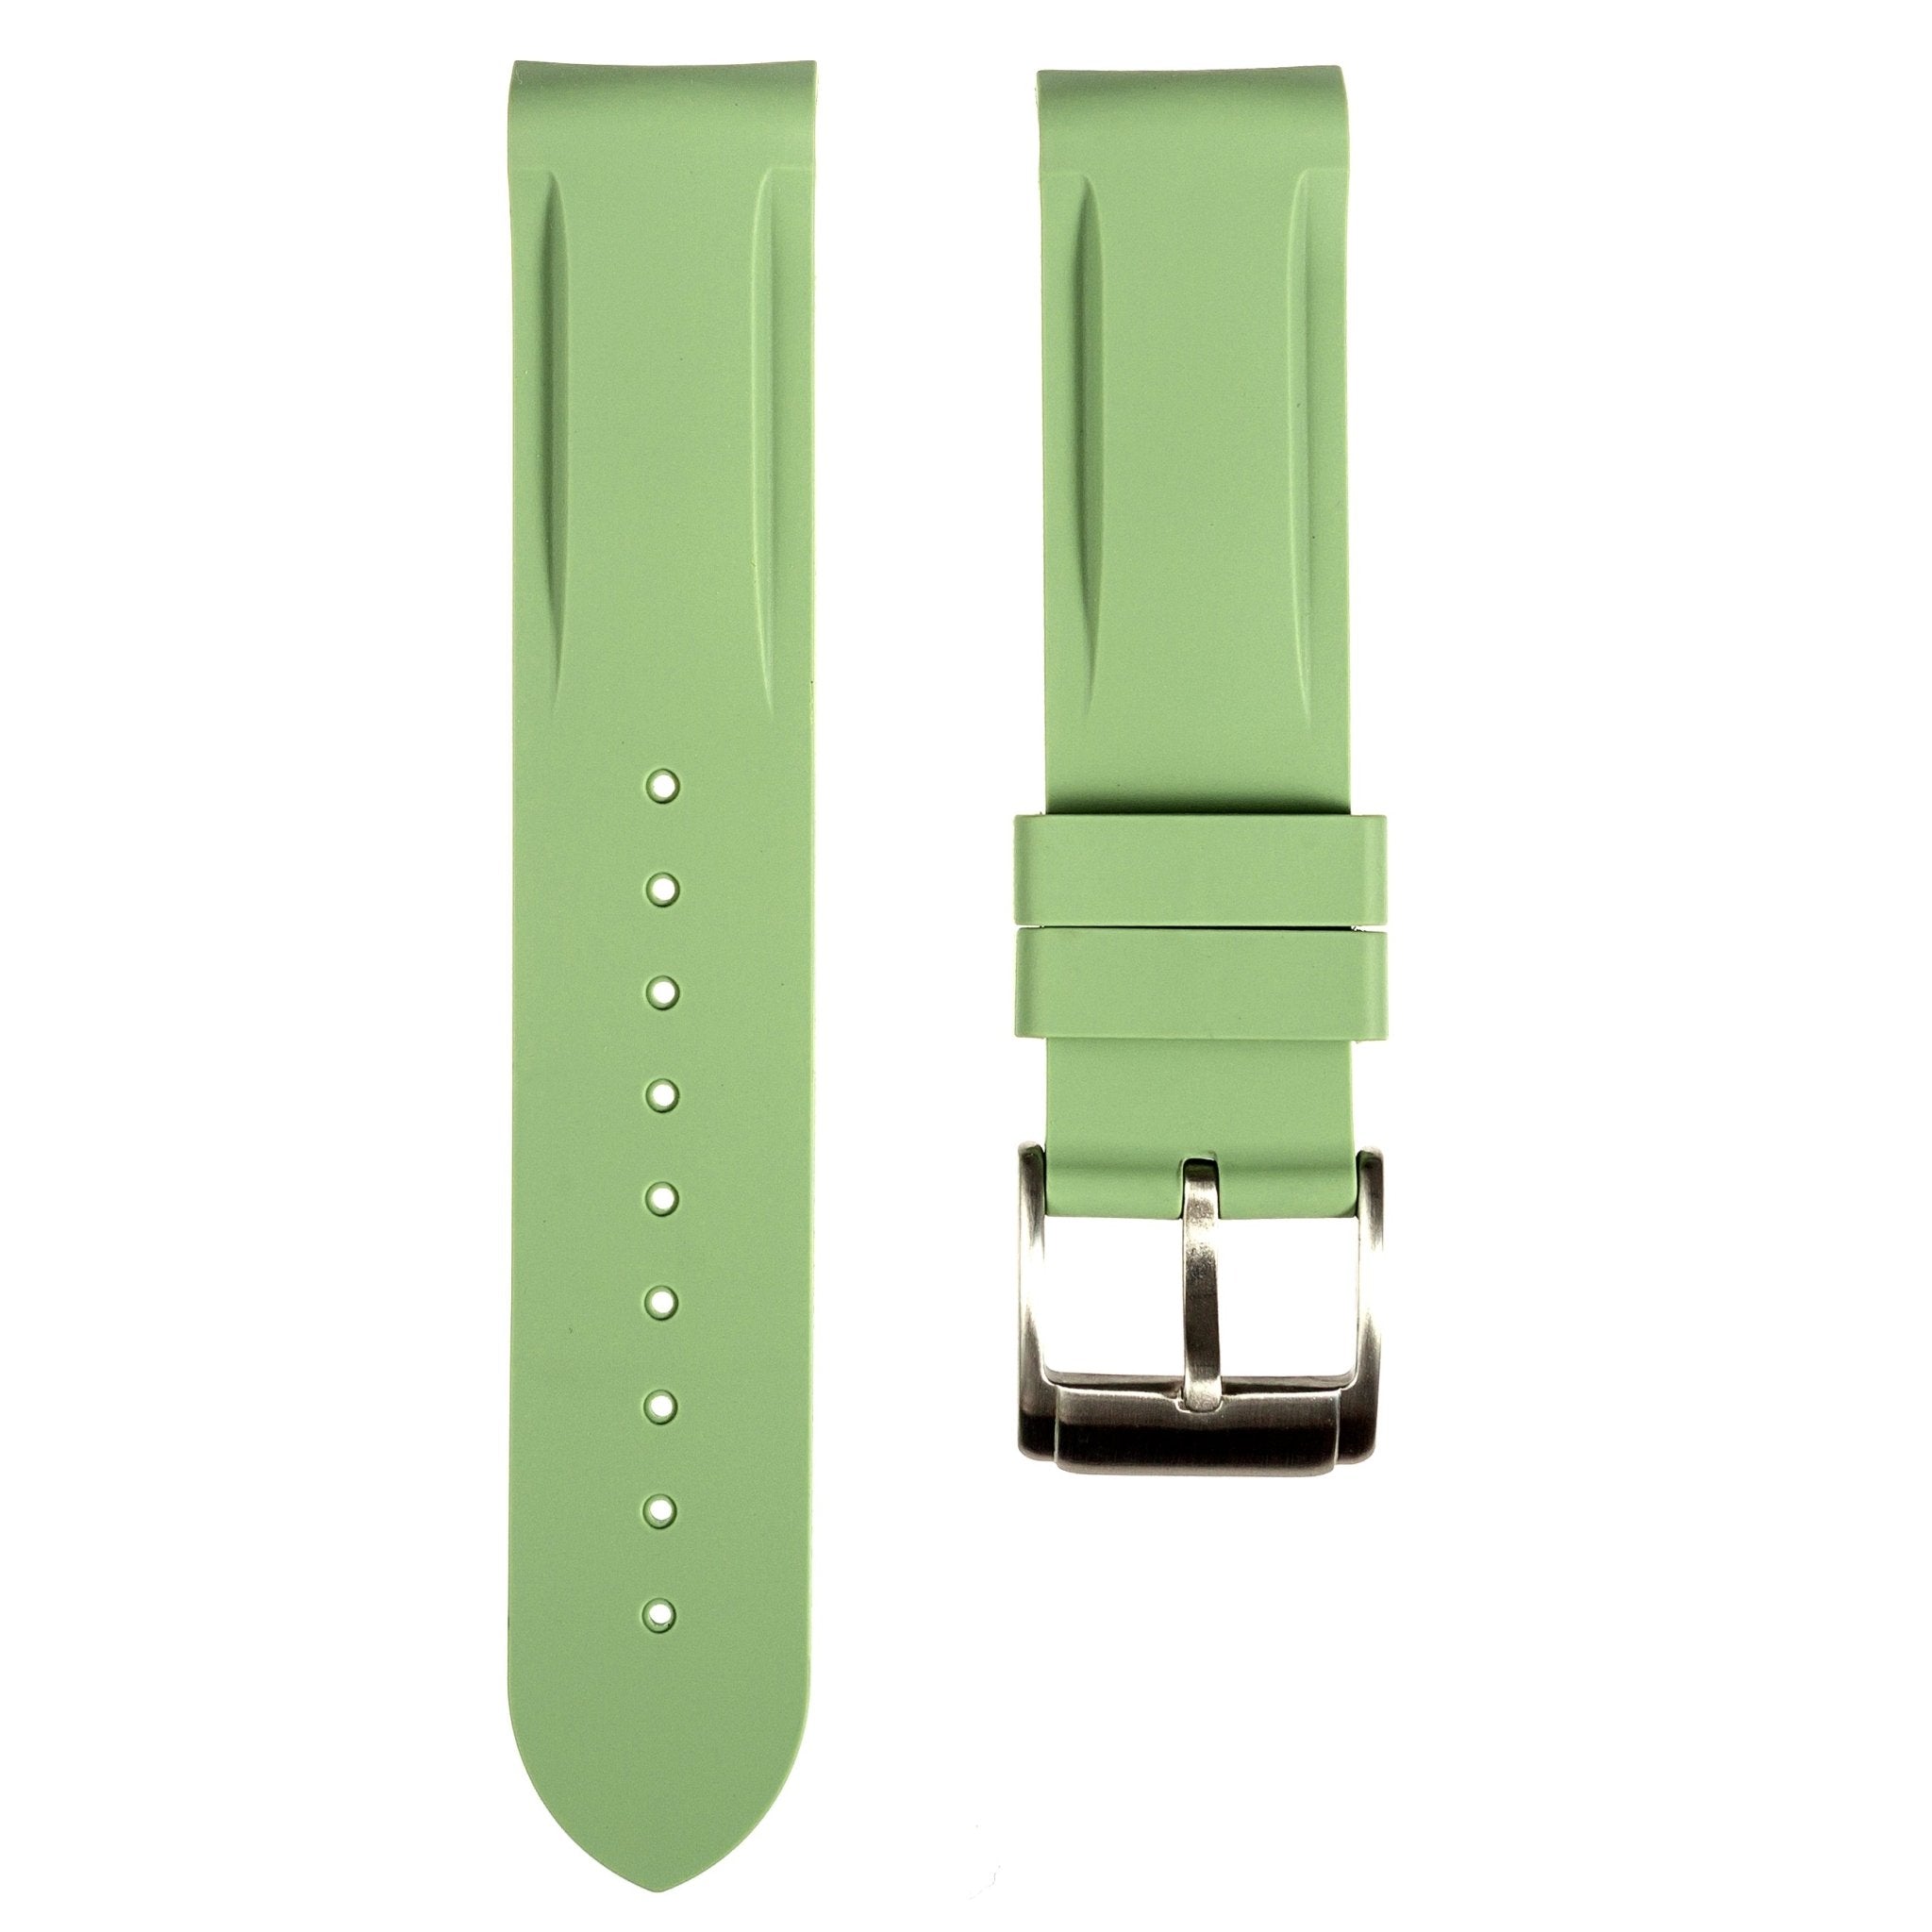 Paramount Curved End Premium Silicone Strap - Light Green (2404) -StrapSeeker